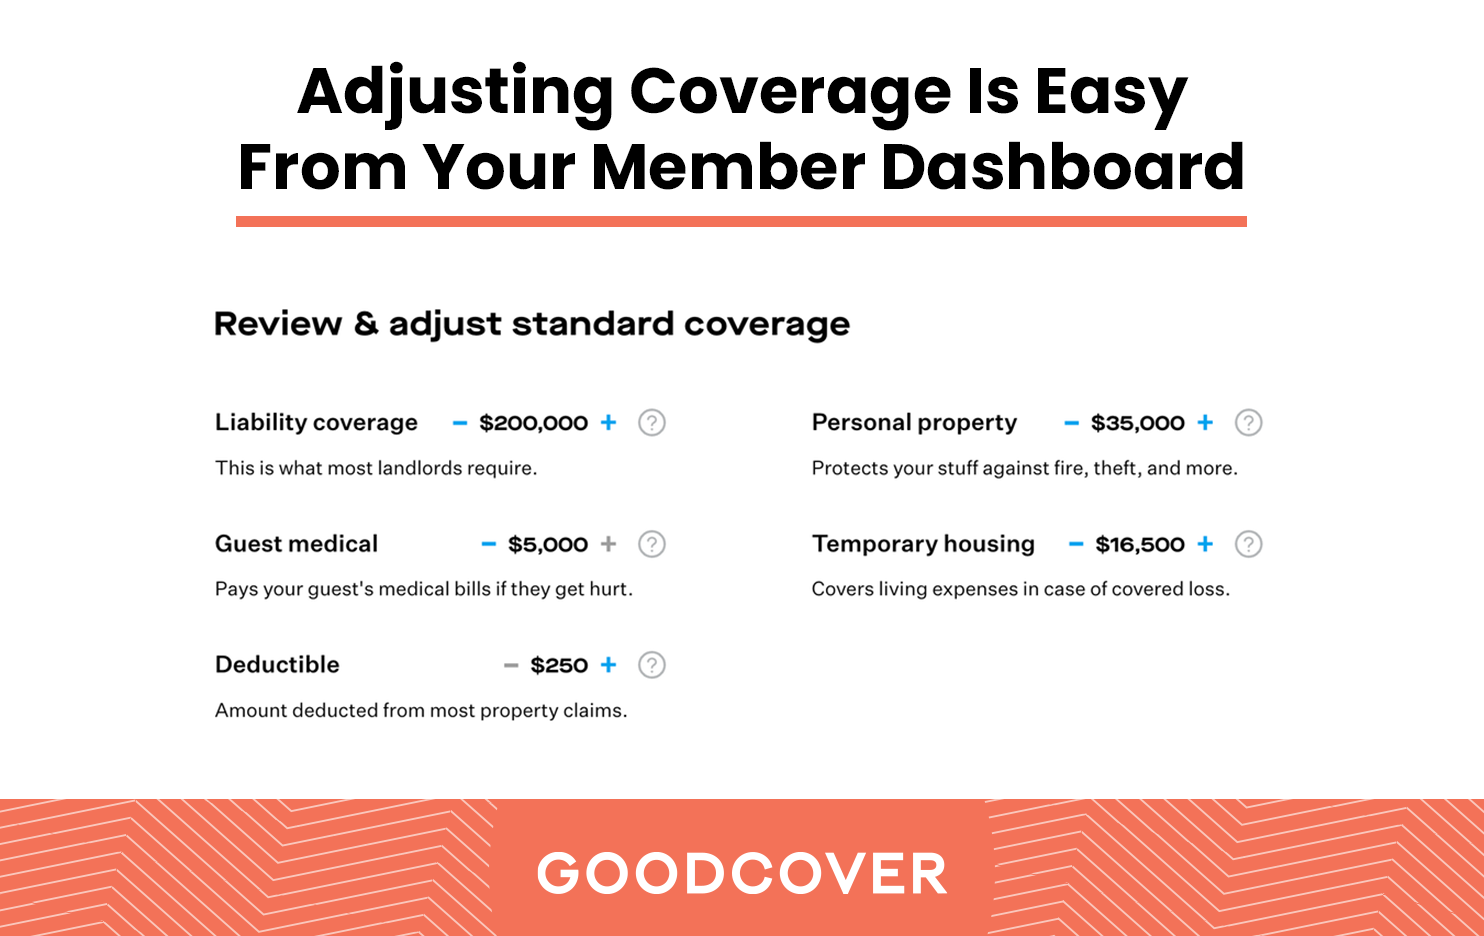 The Member Dashboard lets you quickly adjust your coverage.